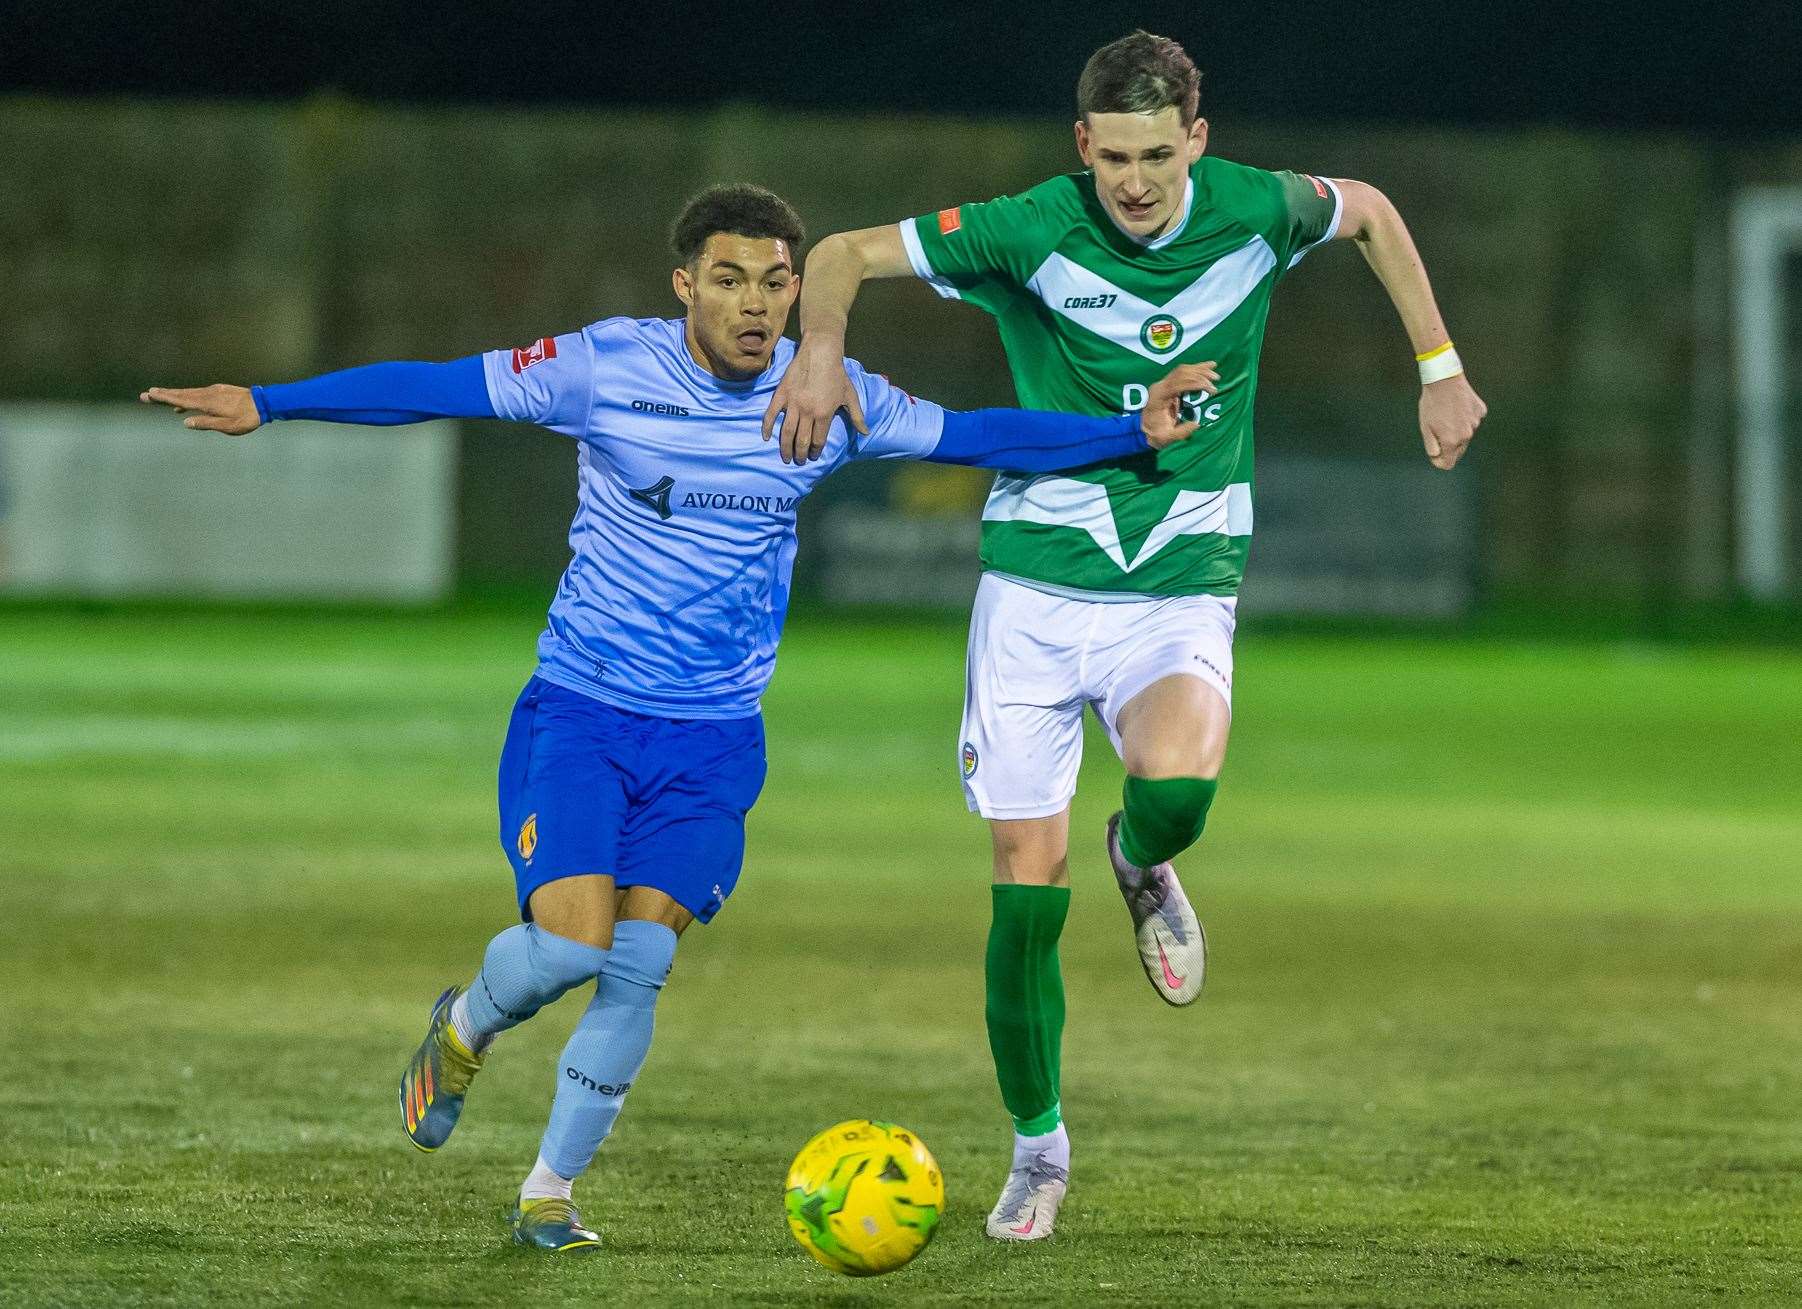 Ashford United defender Dan Hull holds off his man against Lancing Picture: Ian Scammell